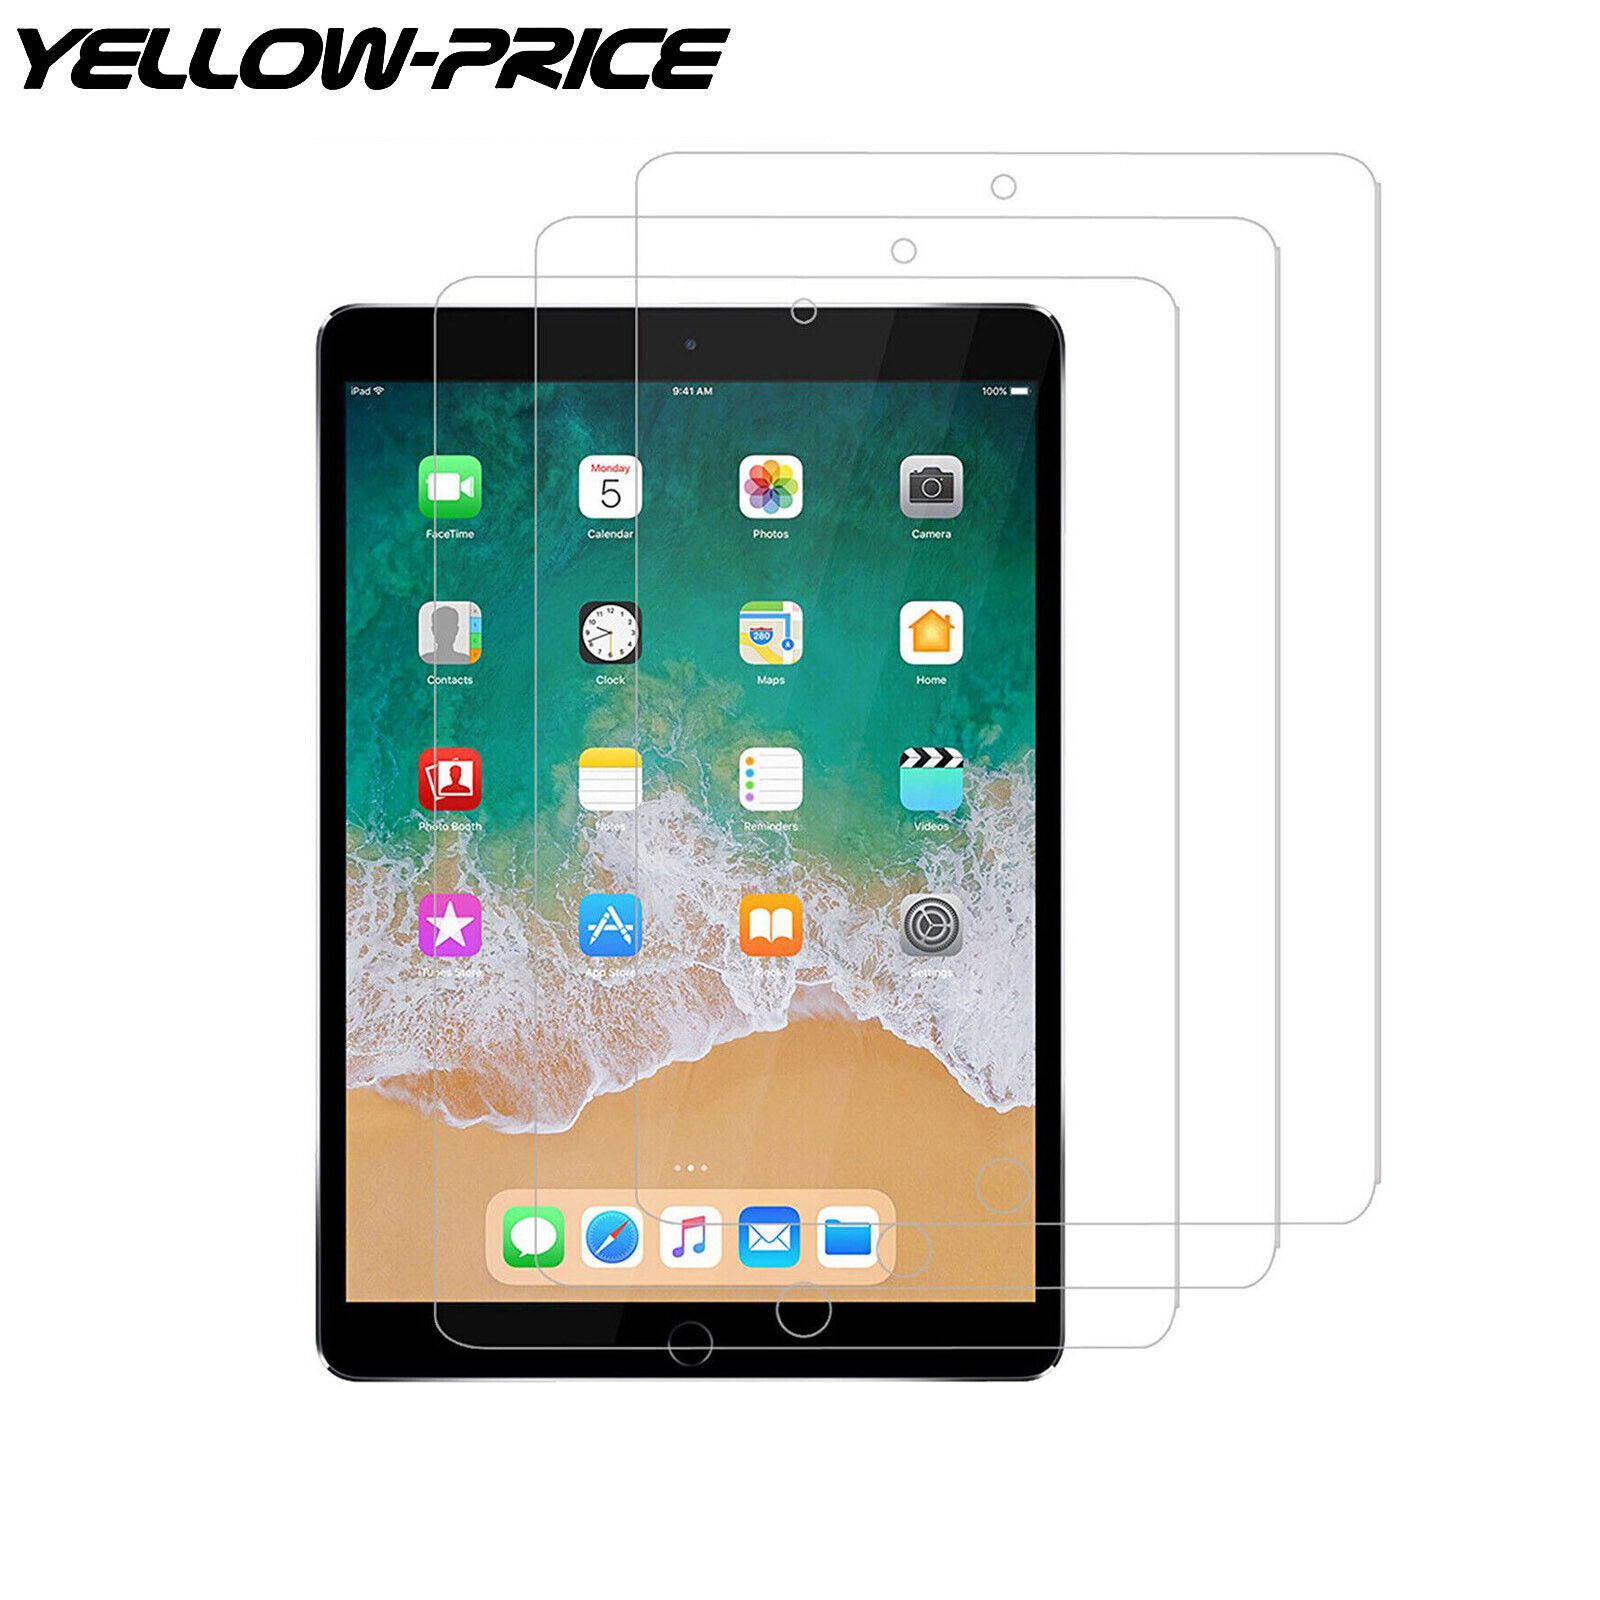 YELLOW-PRICE 3PCS Screen Protector Protective Screen Cover for iPad 2/3/4 9.7''